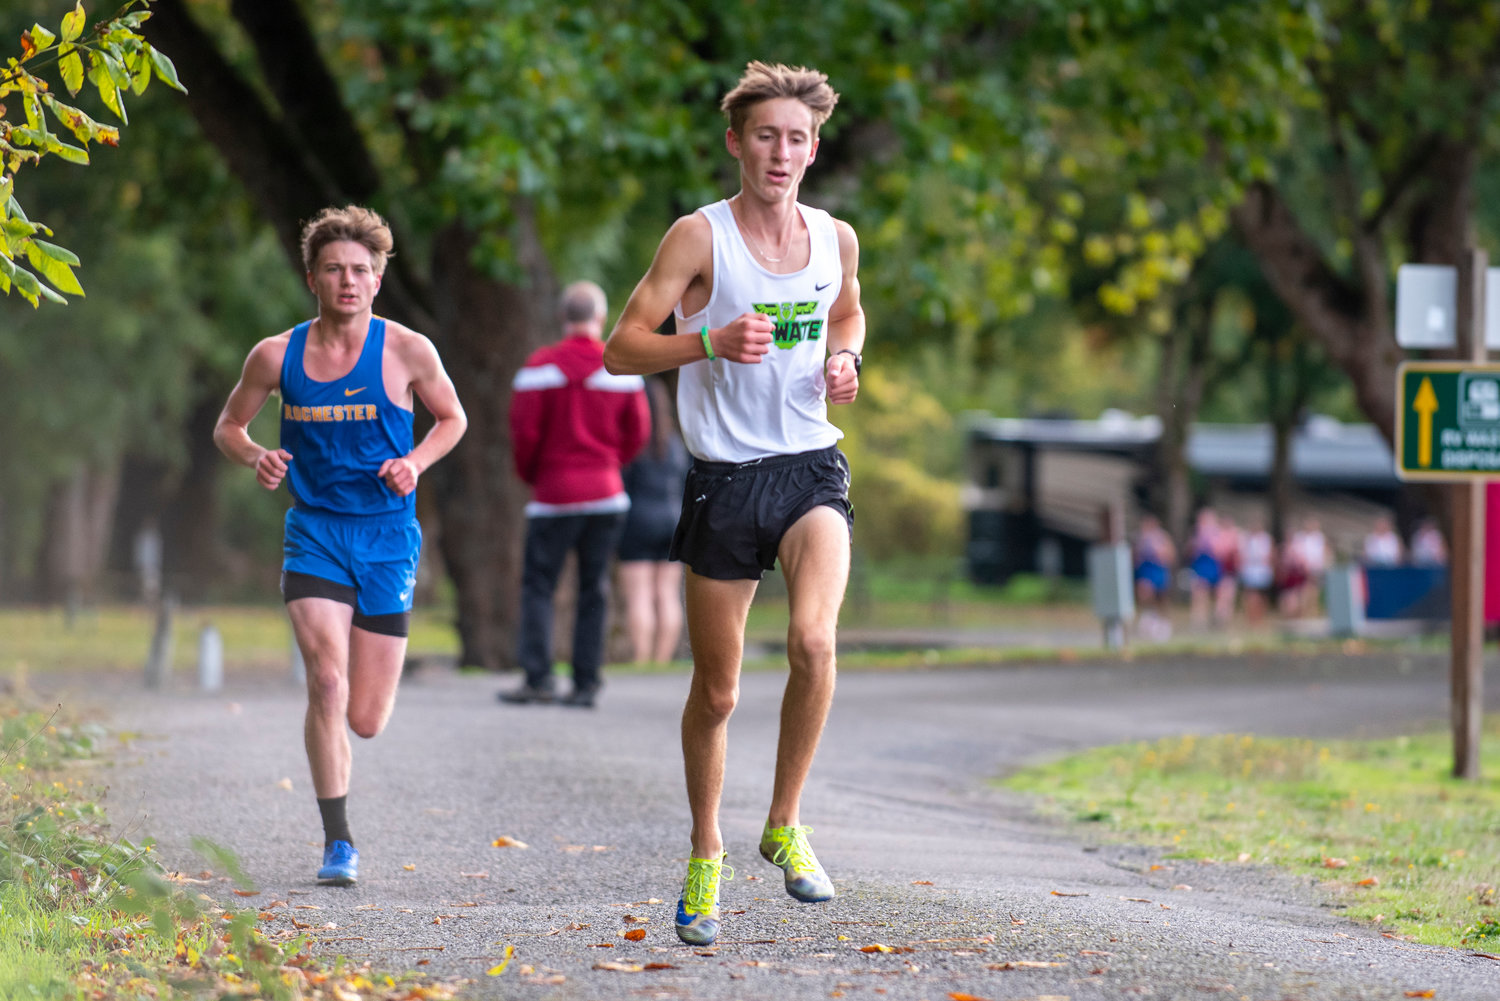 Tumwater's John Hoffer, right, won the boys race at a three-team meet at Stan Hedwall Park in Chehalis on Wednesday, Oct. 1, 2021. Trailing him is Rochester's Levi Jennings, who placed second.